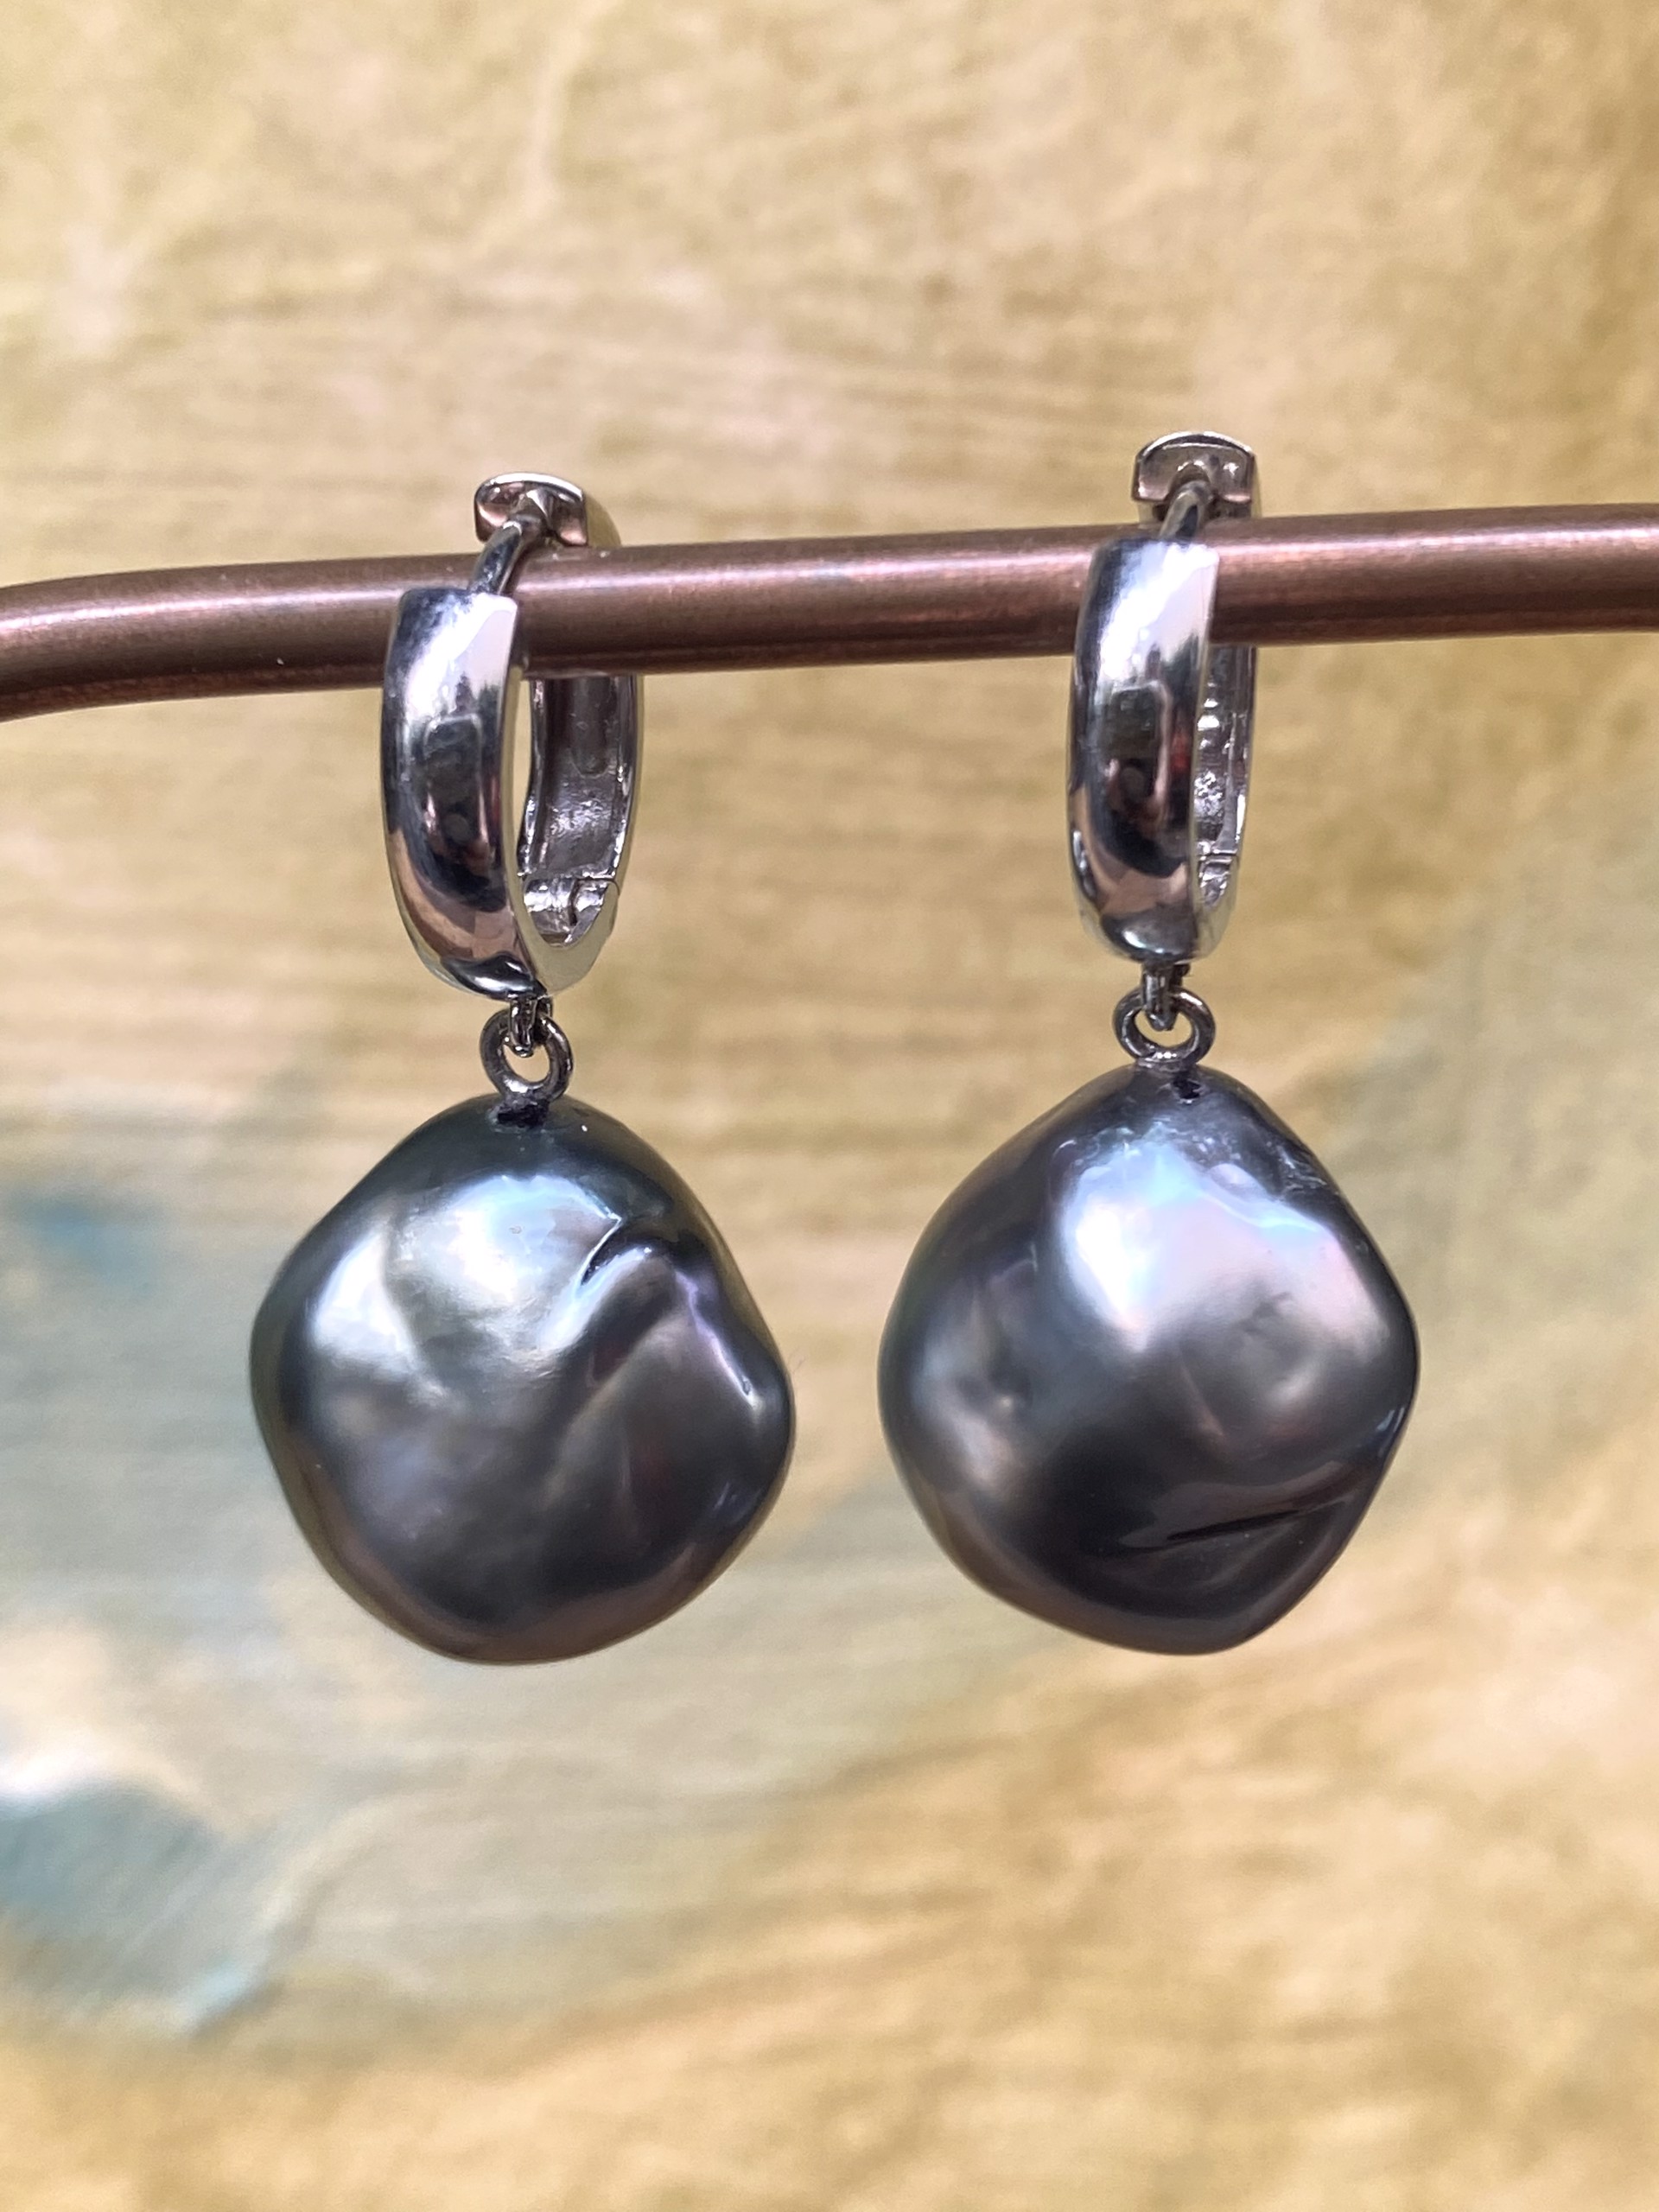 14K White Gold Cuffs with Baroque Tahitian Pearls 16 x 14mm by Sidney Soriano